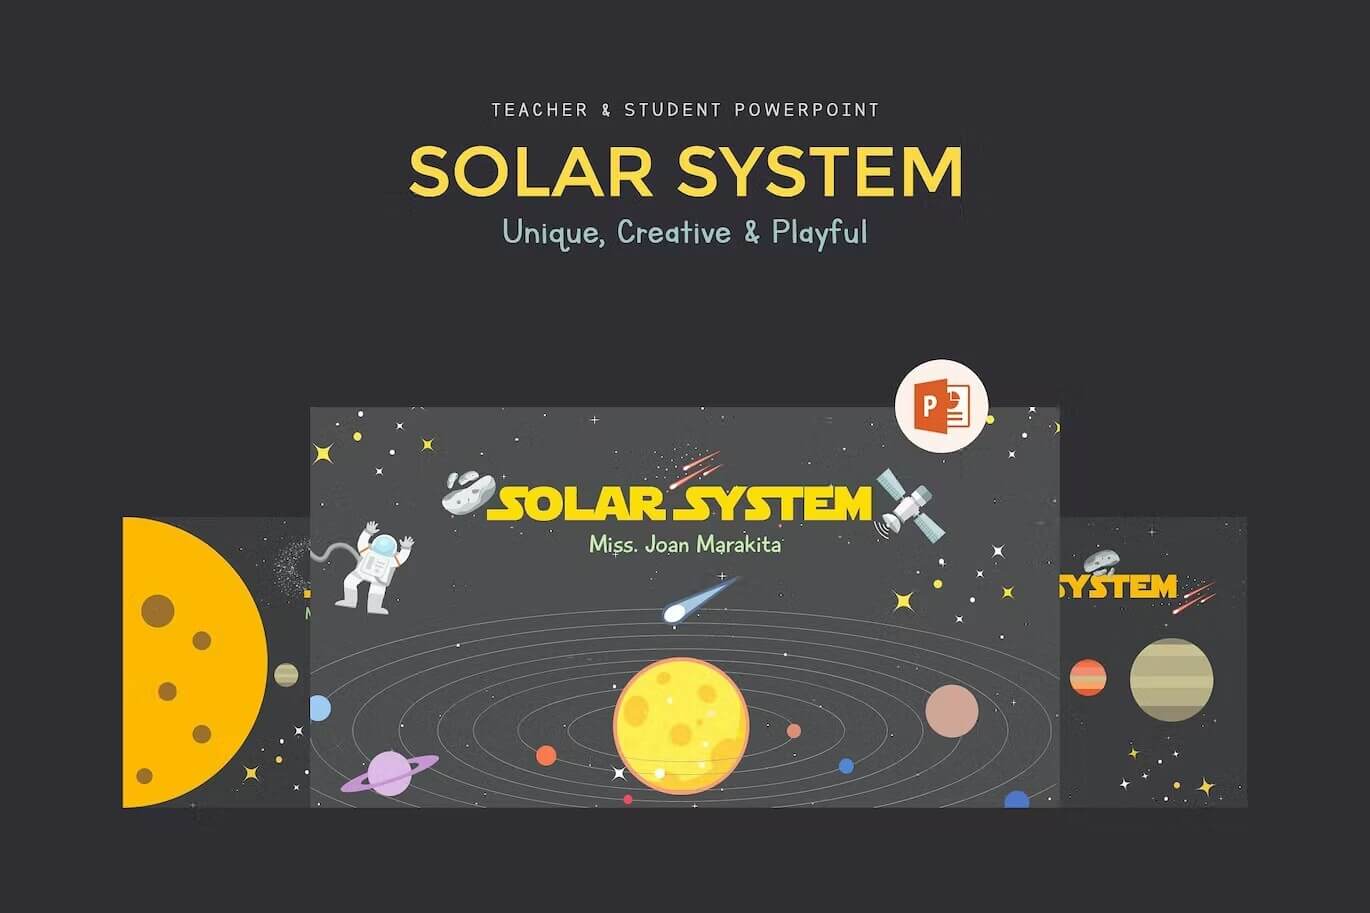 Title page of the presentation "solar system" with the image of planets, cosmonauts.